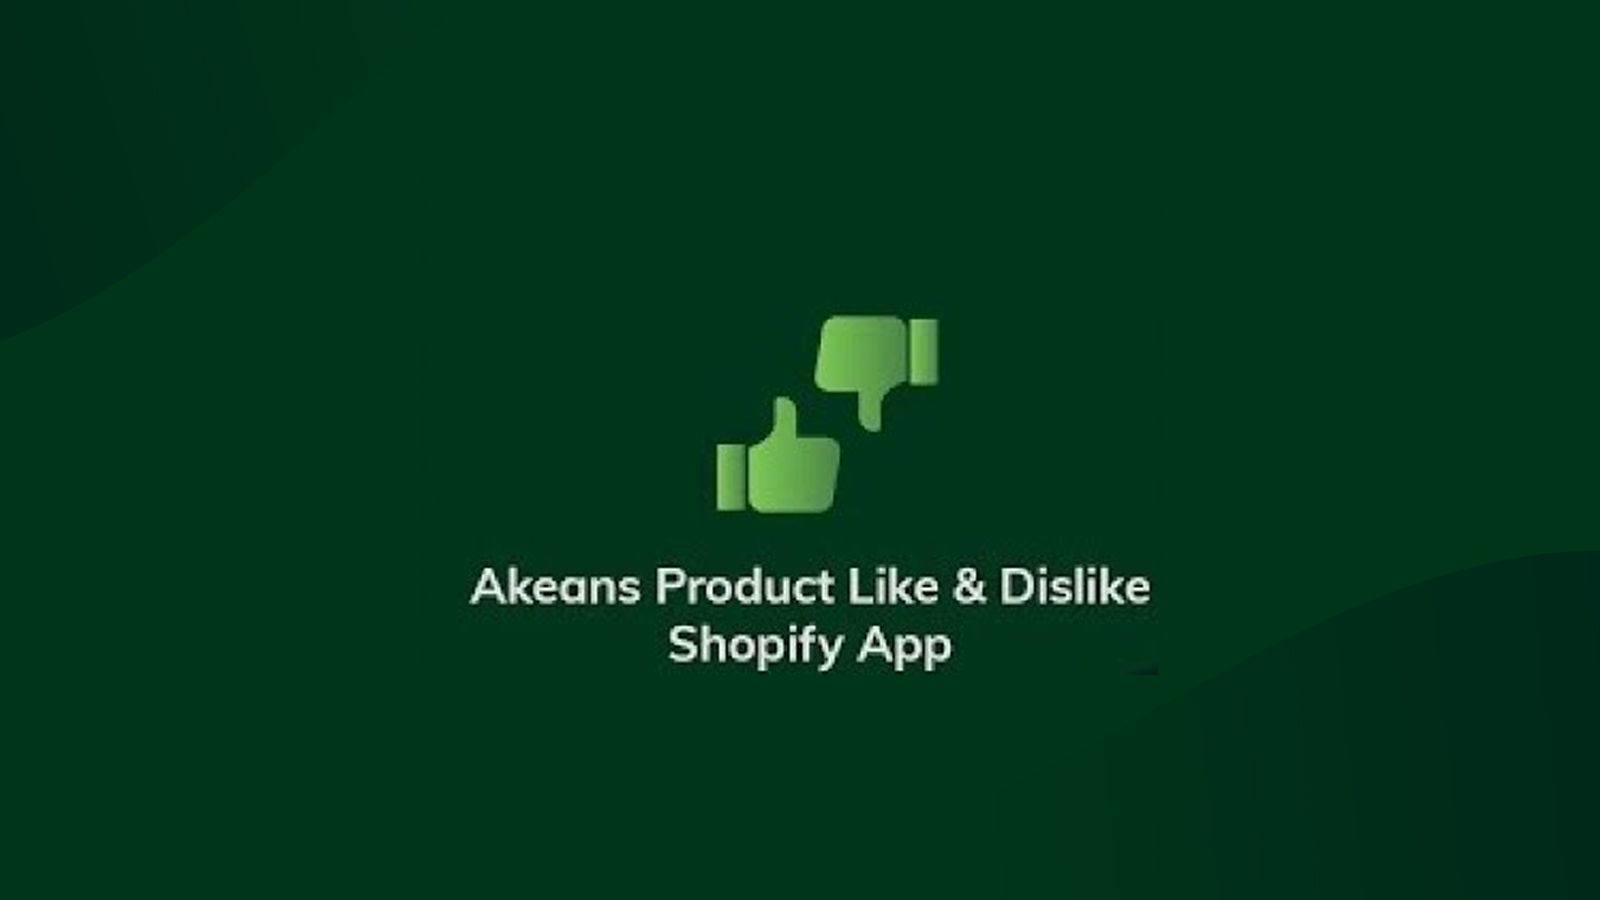 Akeans Likes and Dislikes Shopify App